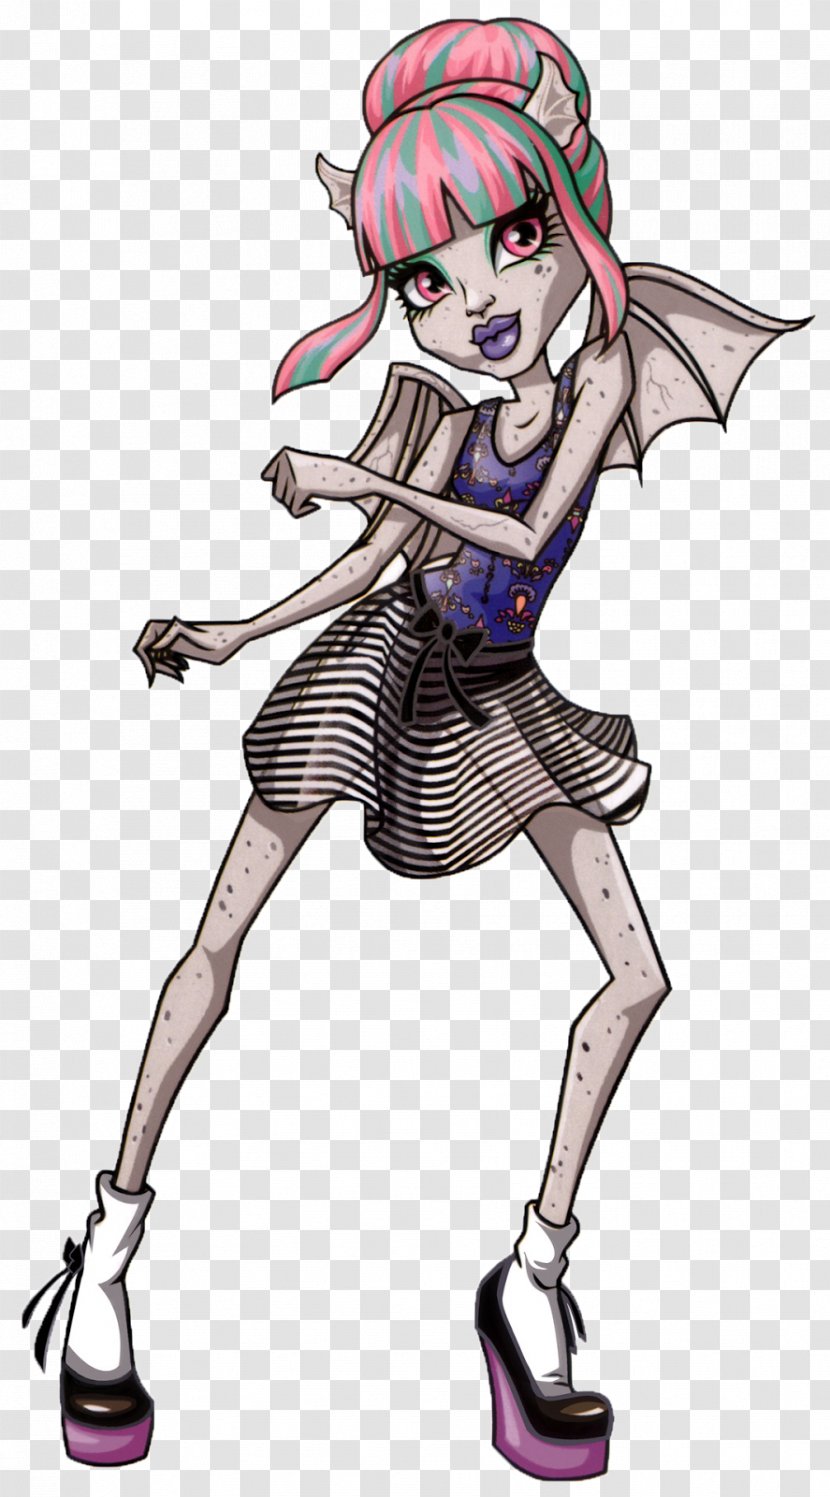 Rochelle Monster High Dance Art Lagoona Blue - Heart - Once Upon A Time Season 5 Transparent PNG